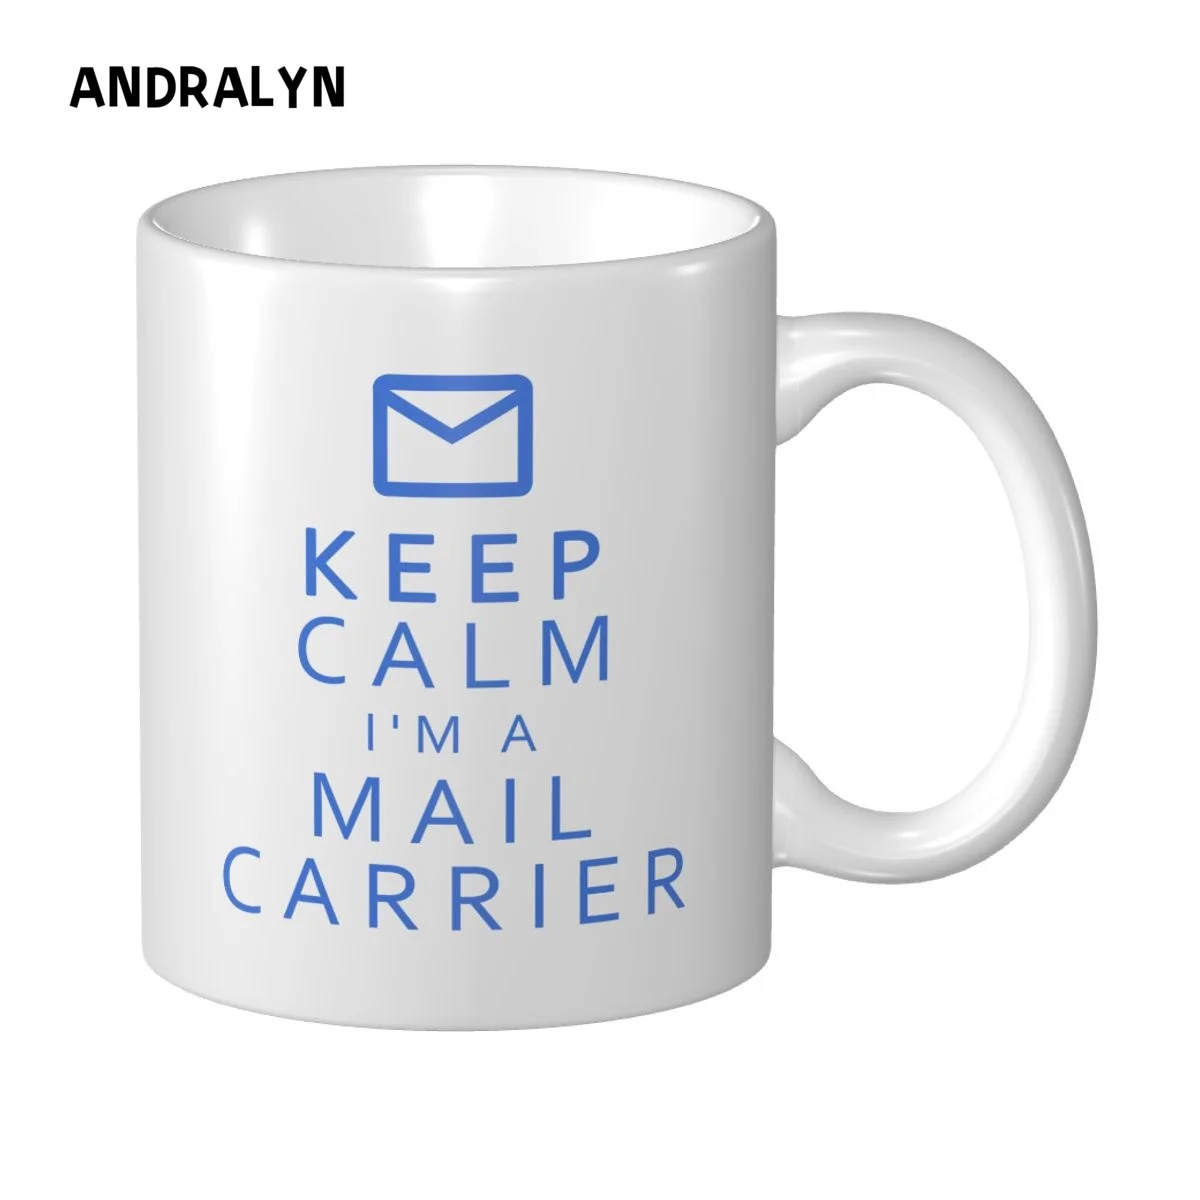 

Keep Calm I'm A Mail Carrier 10oz Ceramic Mug Personalized Print Picture Photo Stranger Things Mugs Cups